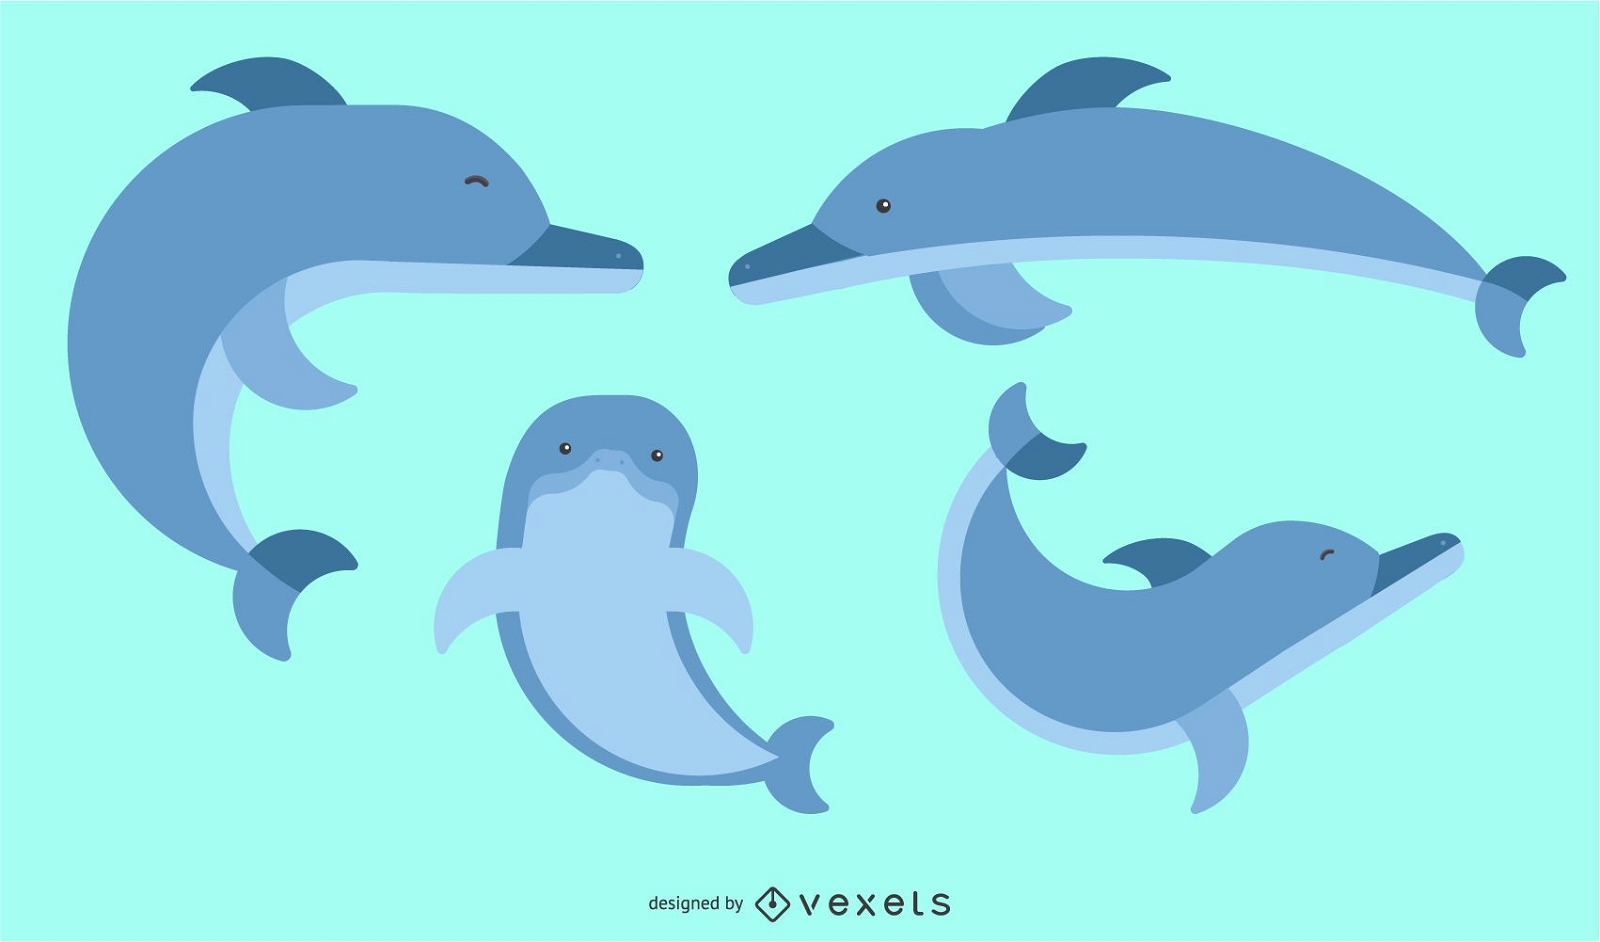 Rounded Geometric Dolphin Design 